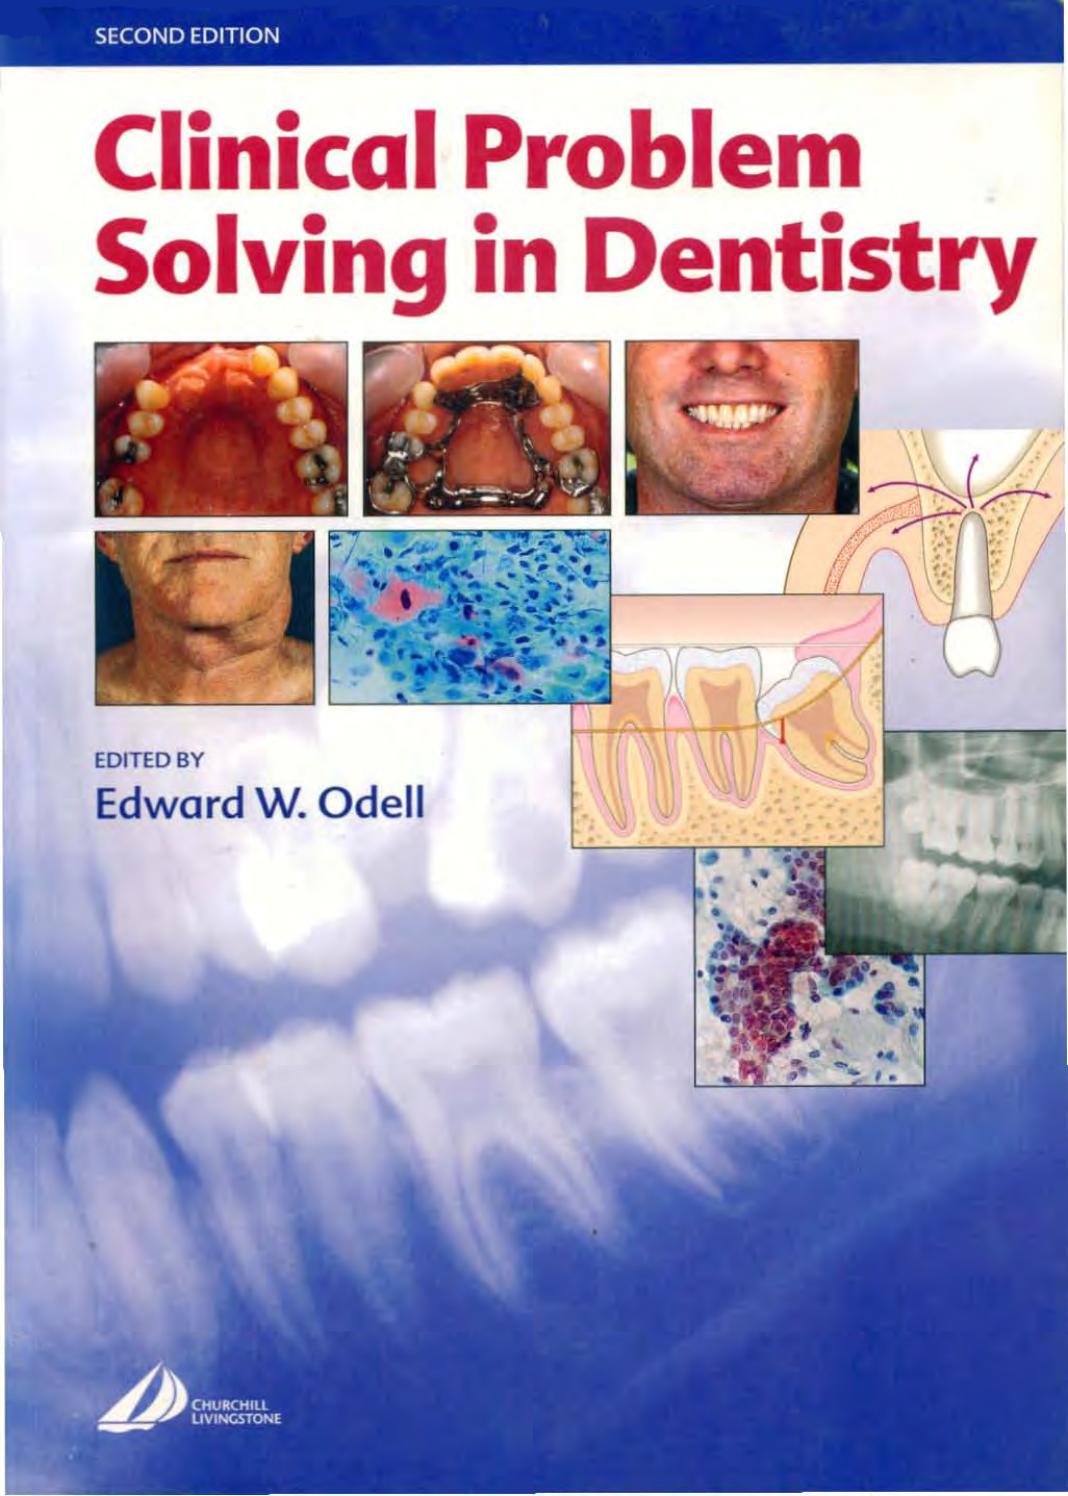 Clinical Problem Solving in Dentistry Odell 2nd Edition